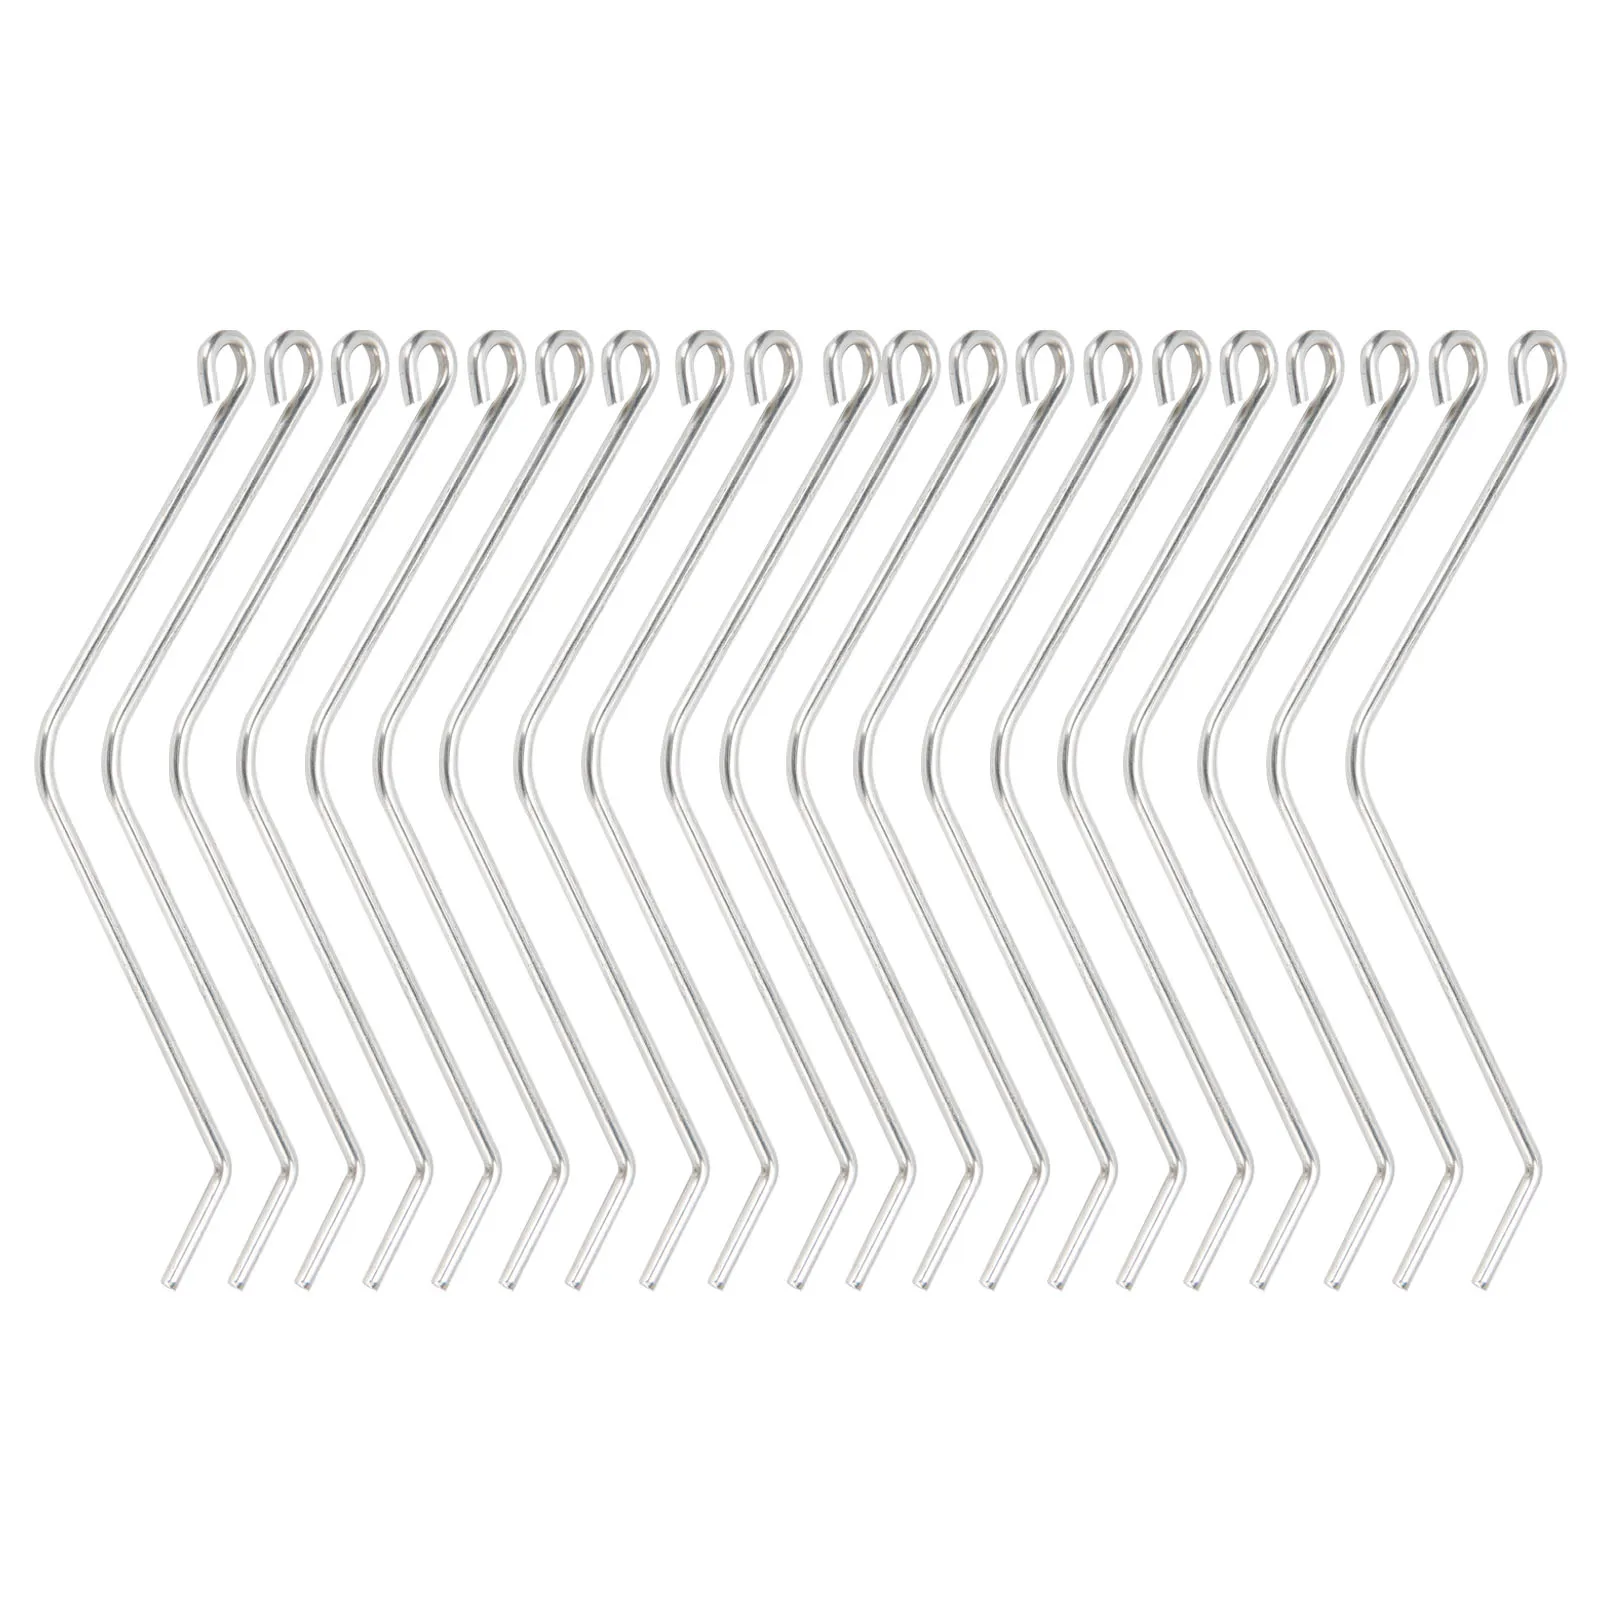 20PCS Stainless Steel Bee Bee Spring Clip Fastener Connectors Bend Wire Holder for Wooden Bee Beekeeping Tools